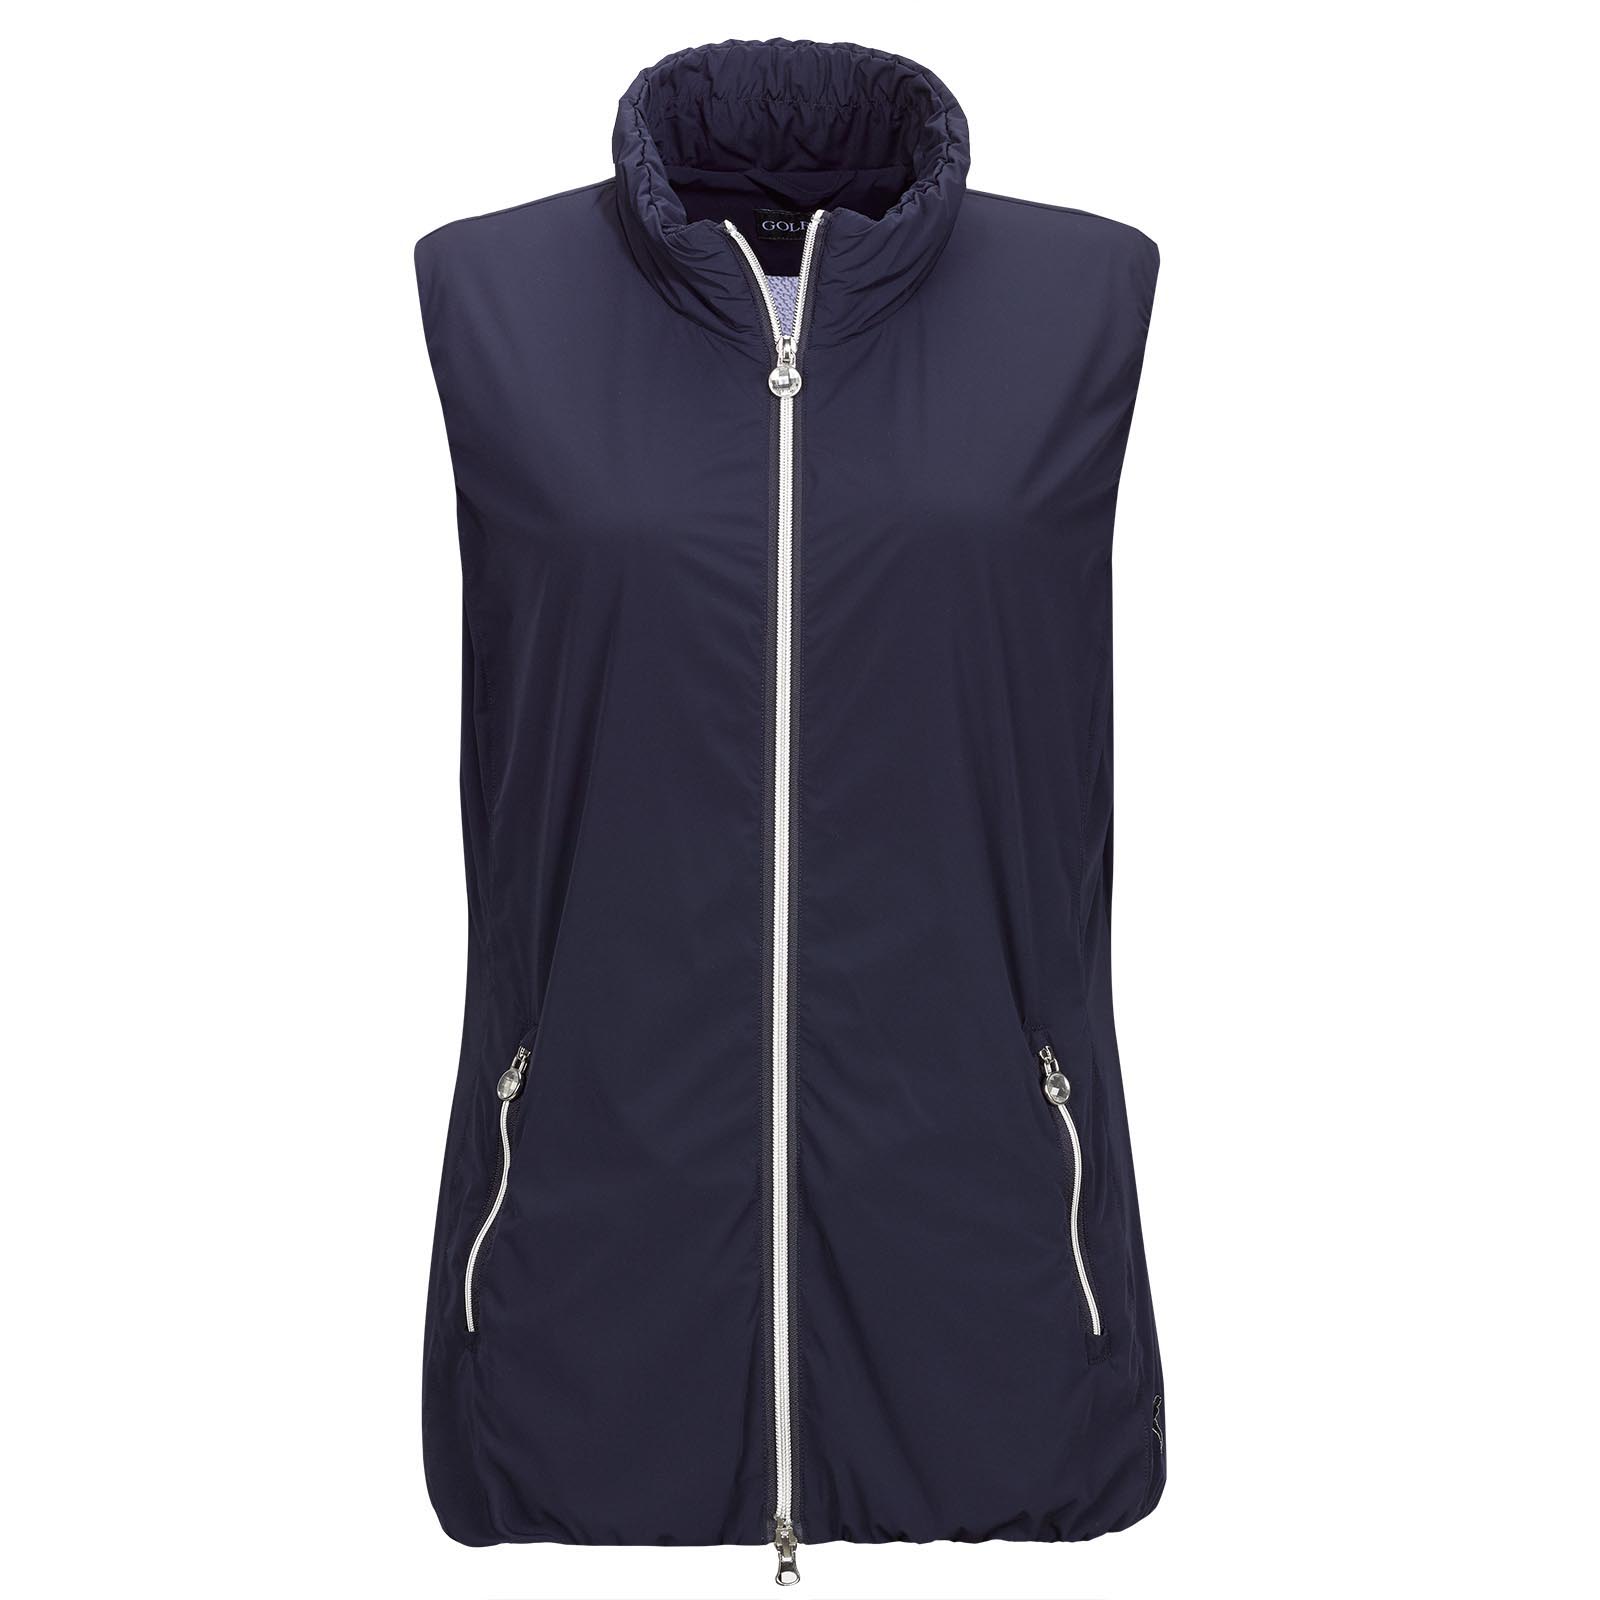 Ladies' golfing gilet made from elastic stretch material with mesh lining